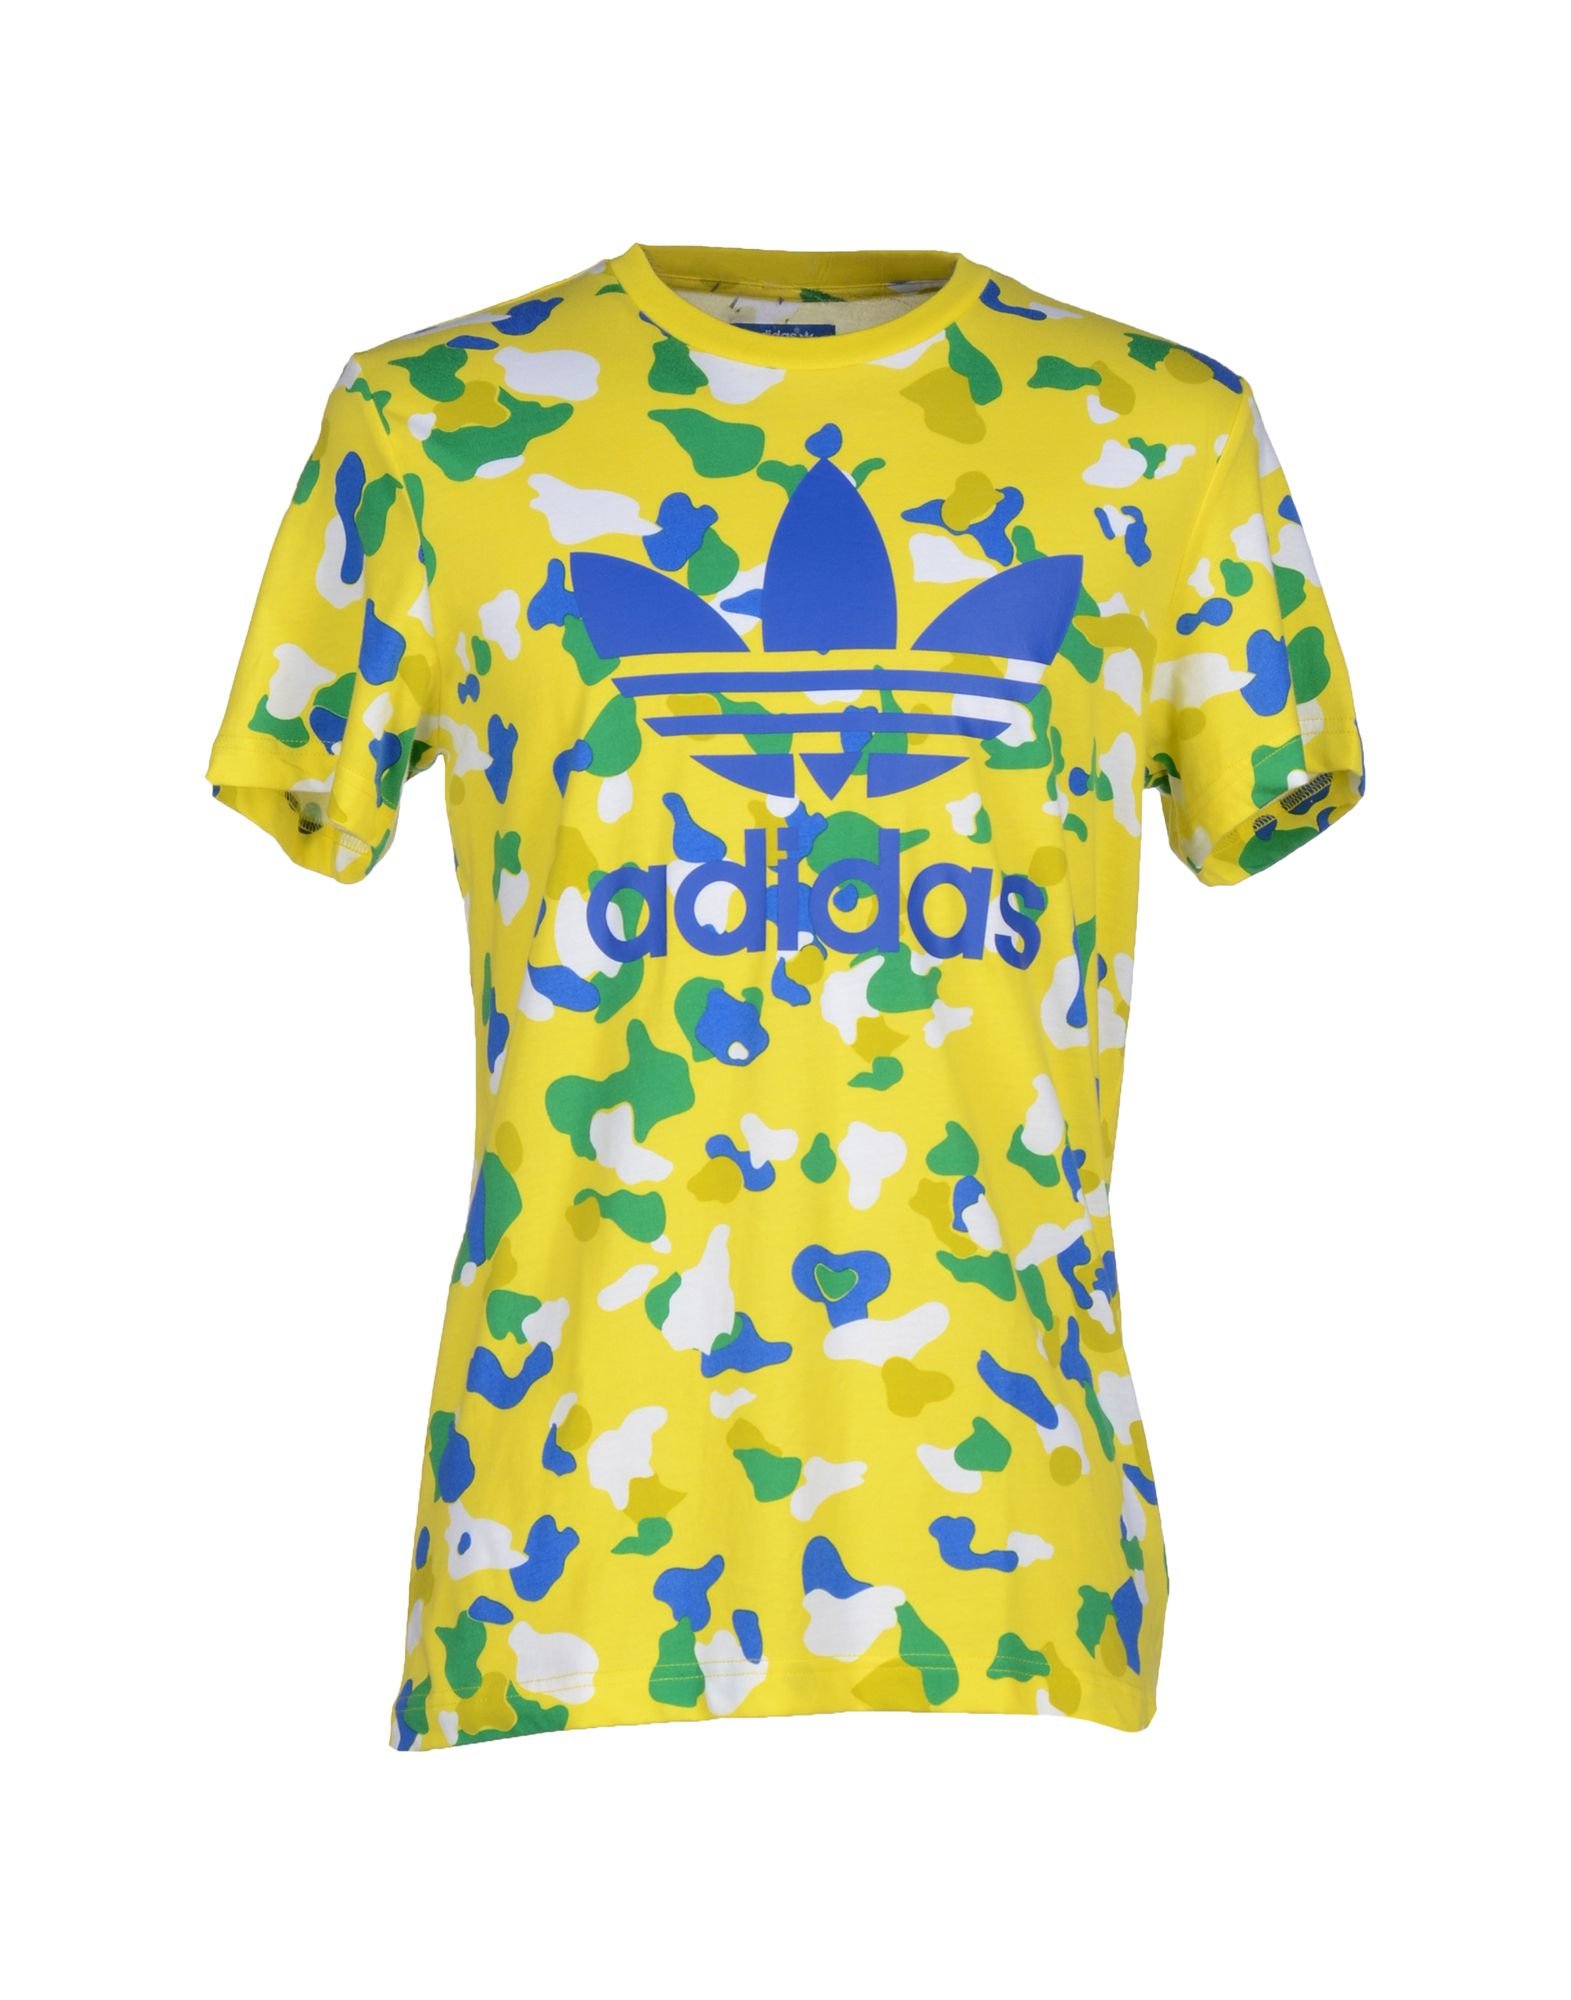 adidas t shirt blue and yellow